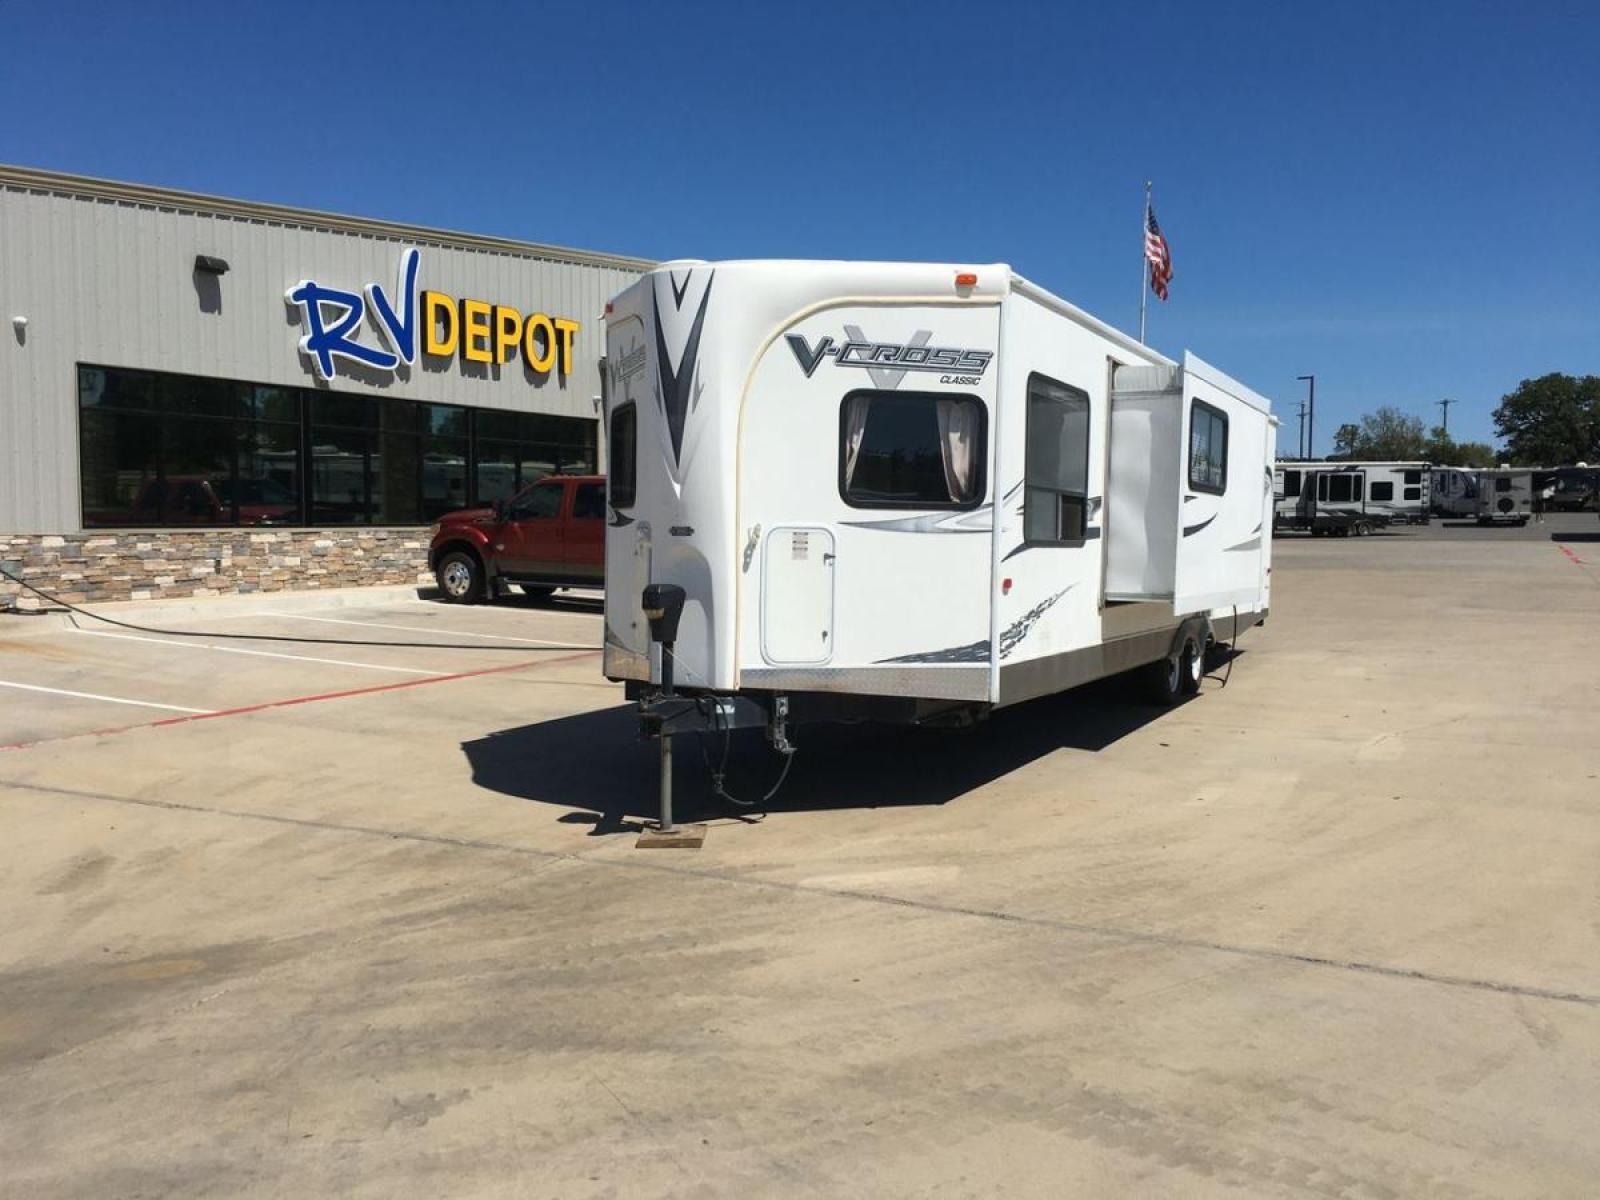 2013 WHITE FOREST RIVER V-CROSS 29VCFL (4X4TVCE22DX) , Length: 33.67 ft | Dry Weight: 6,808 lbs. | Gross Weight: 7,874 lbs. | Slides: 1 transmission, located at 4319 N Main St, Cleburne, TX, 76033, (817) 678-5133, 32.385960, -97.391212 - This 33-foot 2013 Forest River V-Cross 29VCFL trailer offers both comfort and functionality. Its floor plan features a front living area, a fully equipped kitchen, a cozy bedroom, and a spacious bathroom. As you enter the travel trailer, you'll be greeted by the expansive front living area. This uni - Photo #0